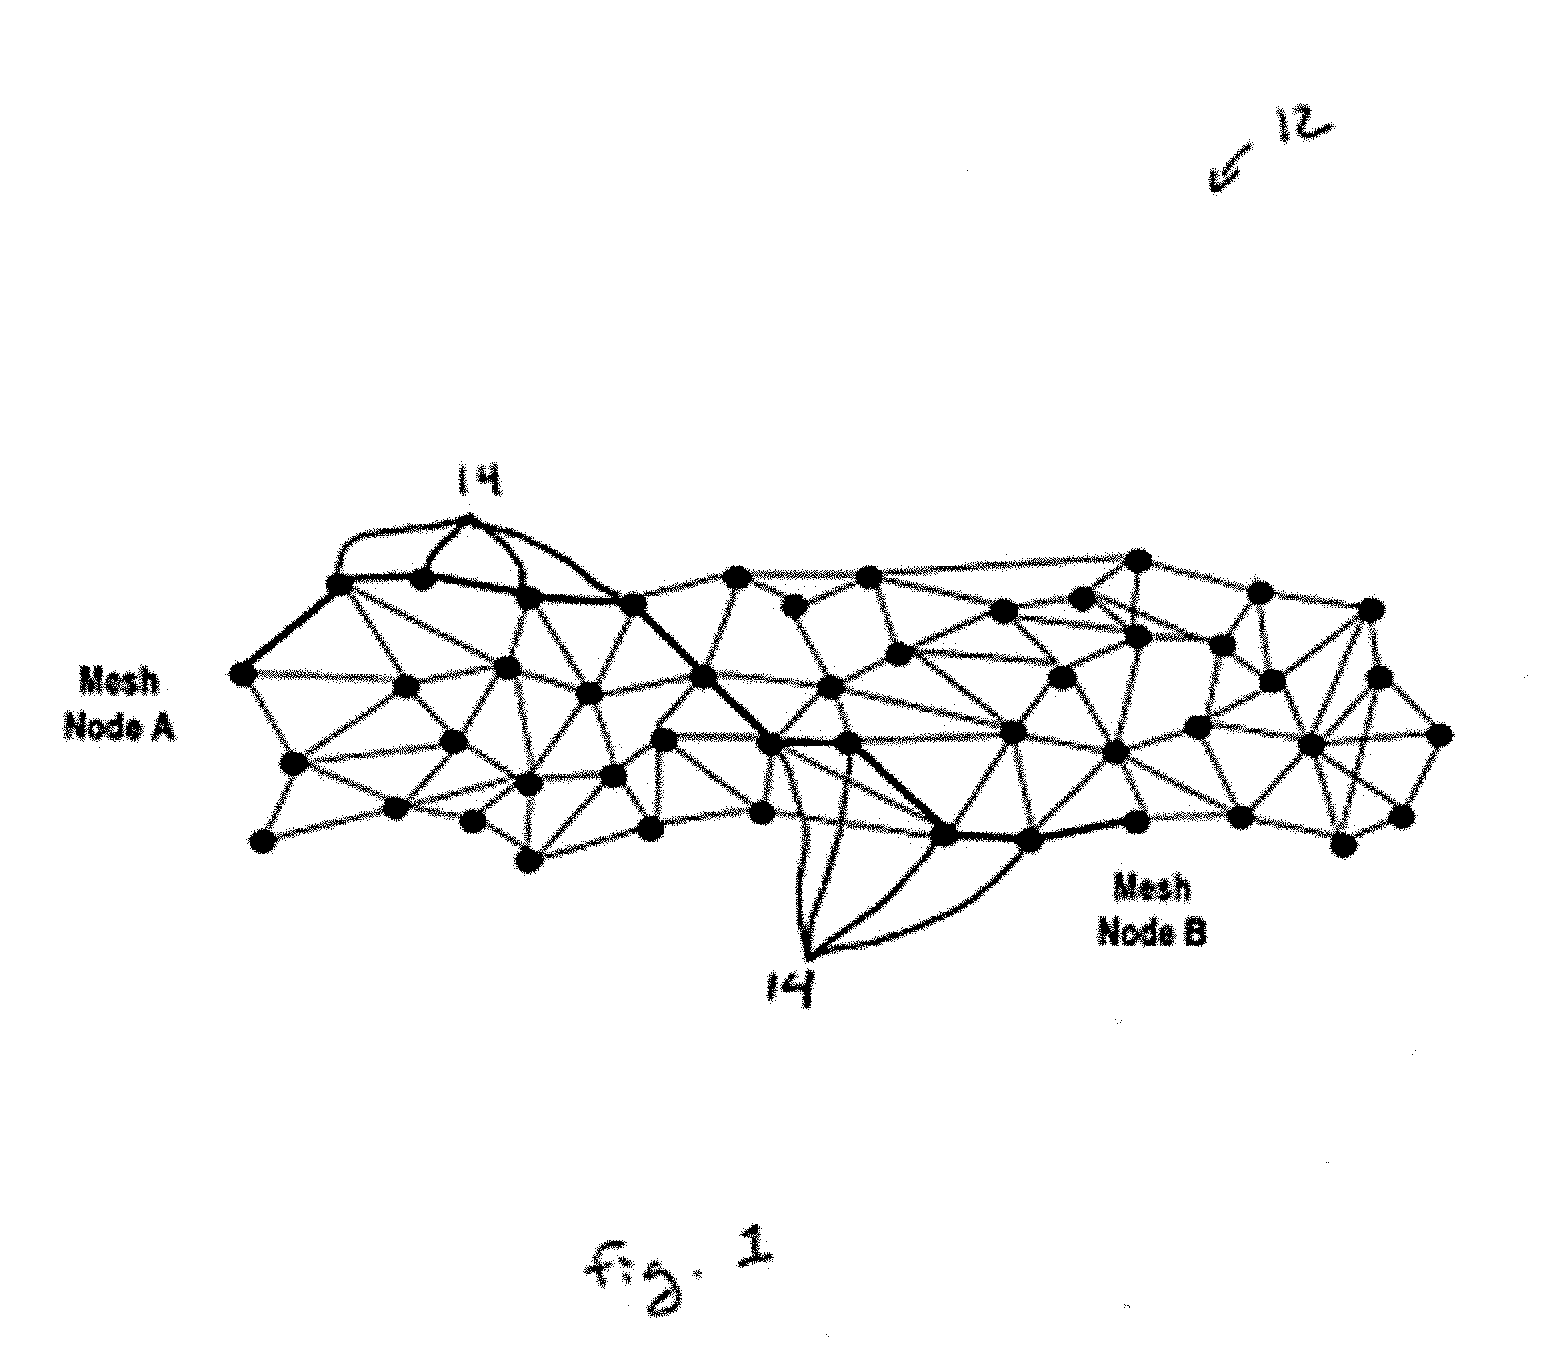 Reliable message distribution in an ad hoc mesh network